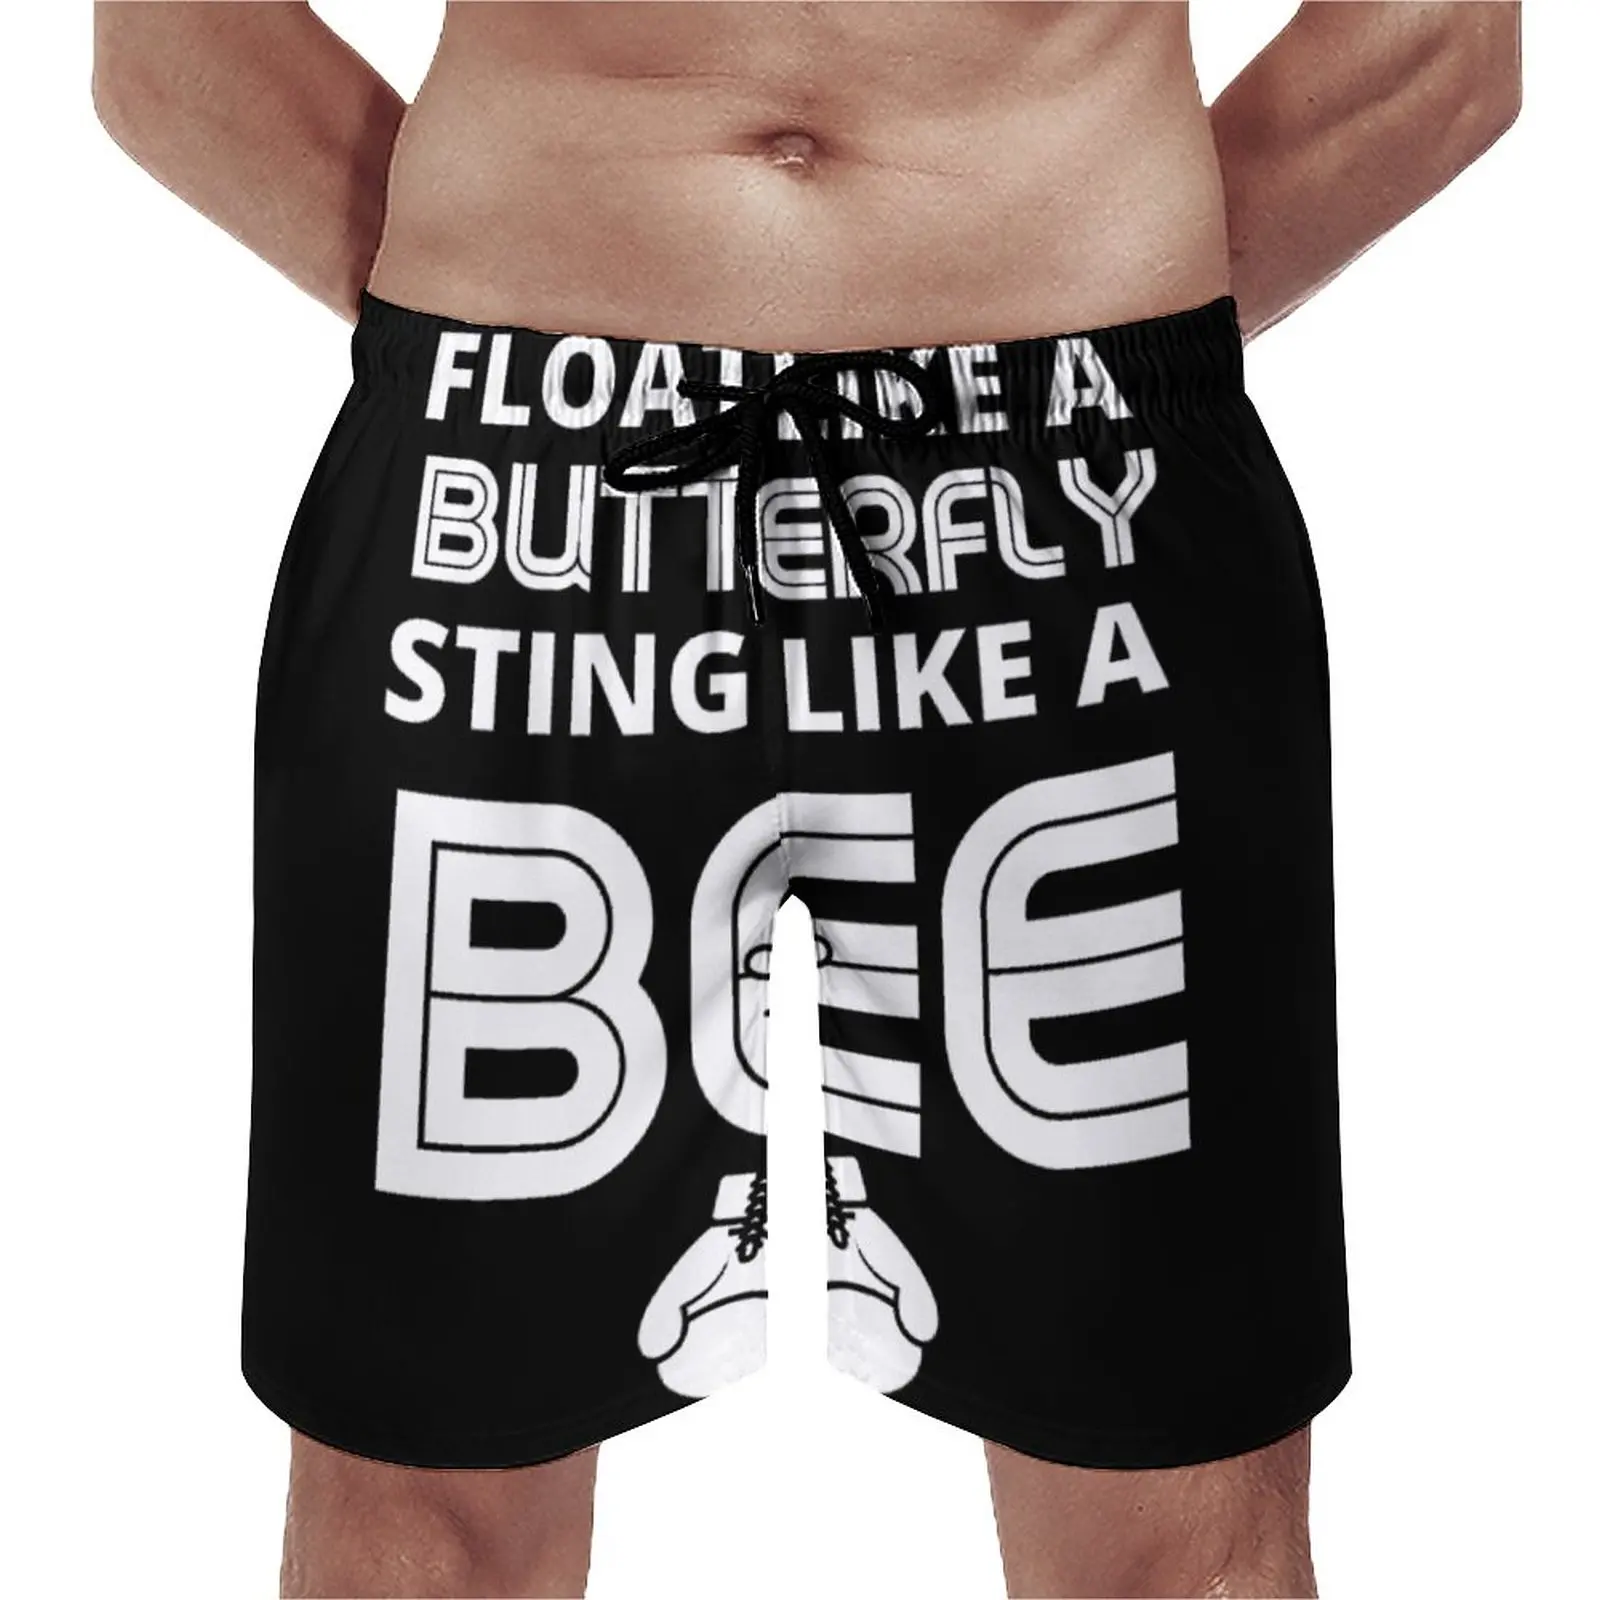 

Float Like A Butterfly Sting Like A Bee Muhammad Ali(1) Anime CausalUnique Adjustable Drawstring Breathable Quick Dry Men's Beac